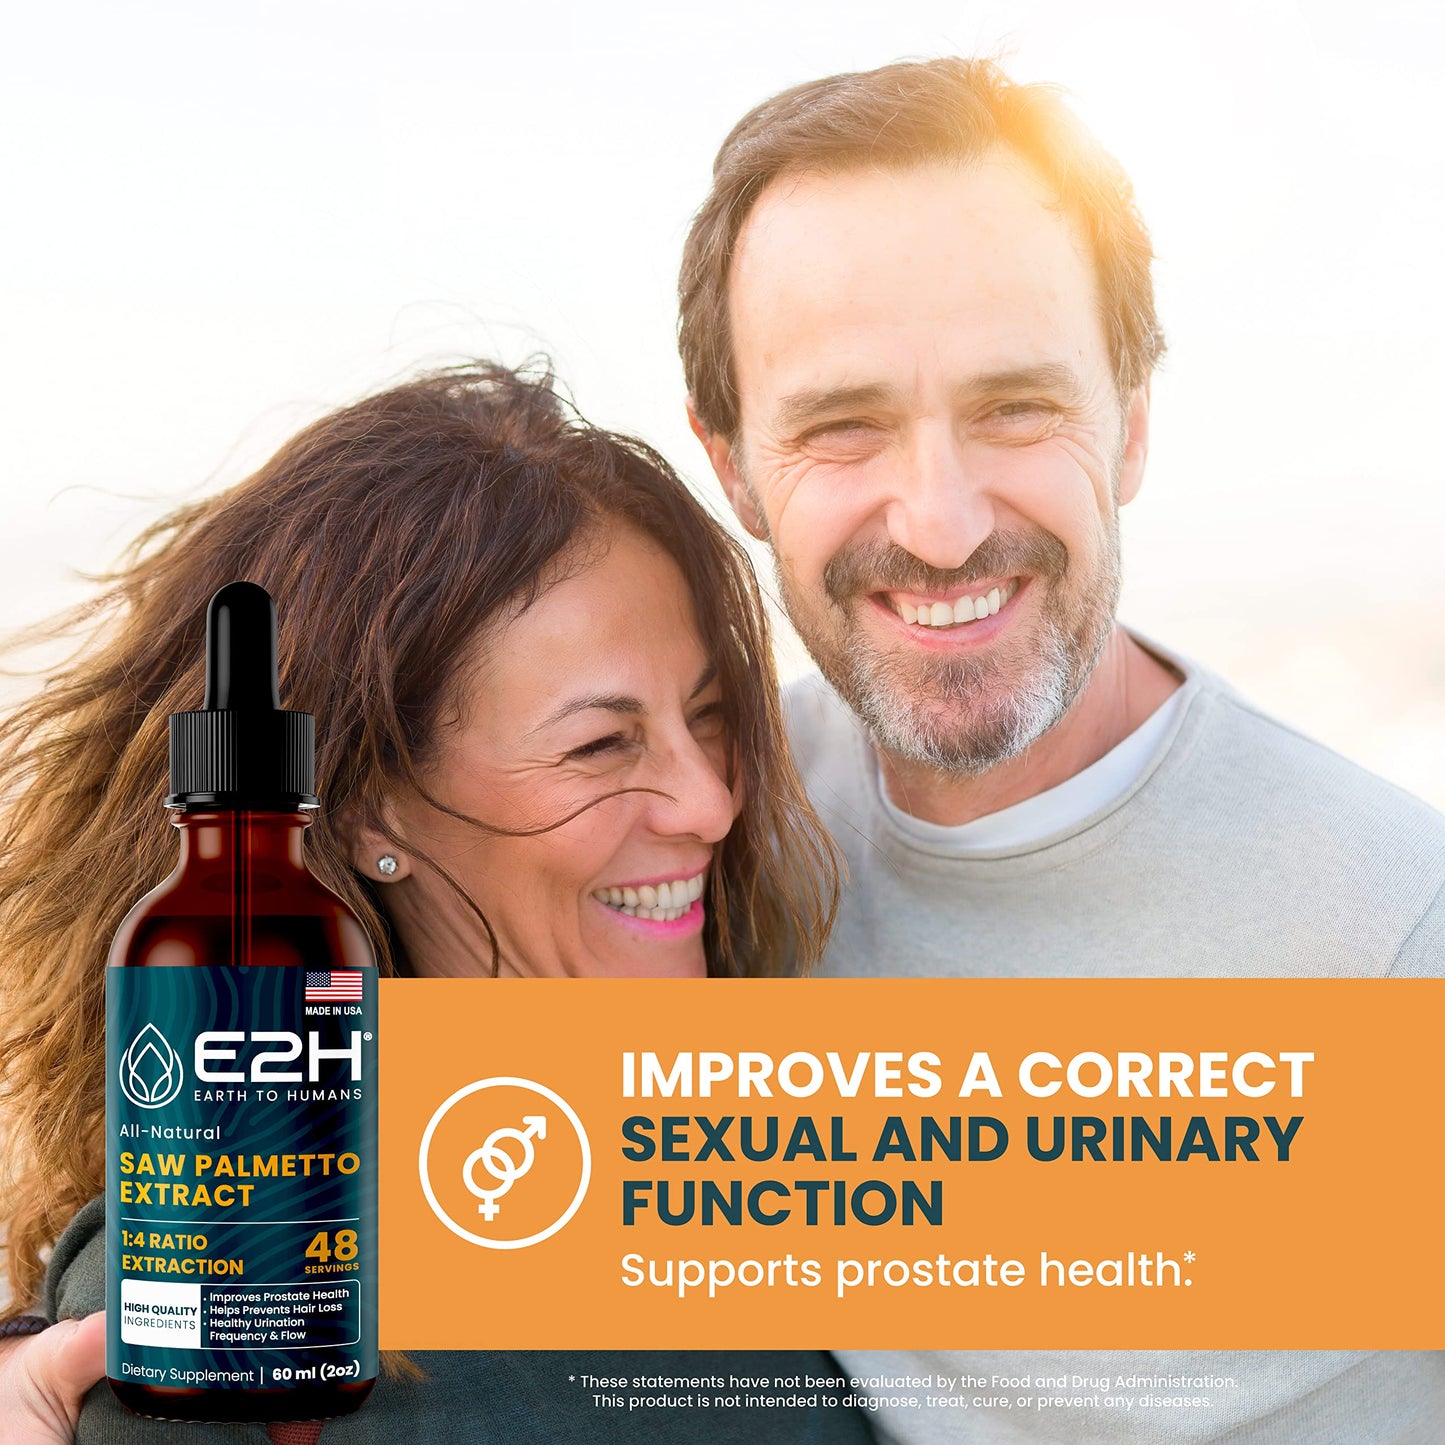 
                  
                    E2H Saw Palmetto Extract, All Natural Prostate Supplement for Men Promotes Urinary Function, Reproduction and Hair Growth - Alcohol-Free 1:4 Ratio Extraction, Vegan Friendly, Non-GMO (3 Bottles)
                  
                